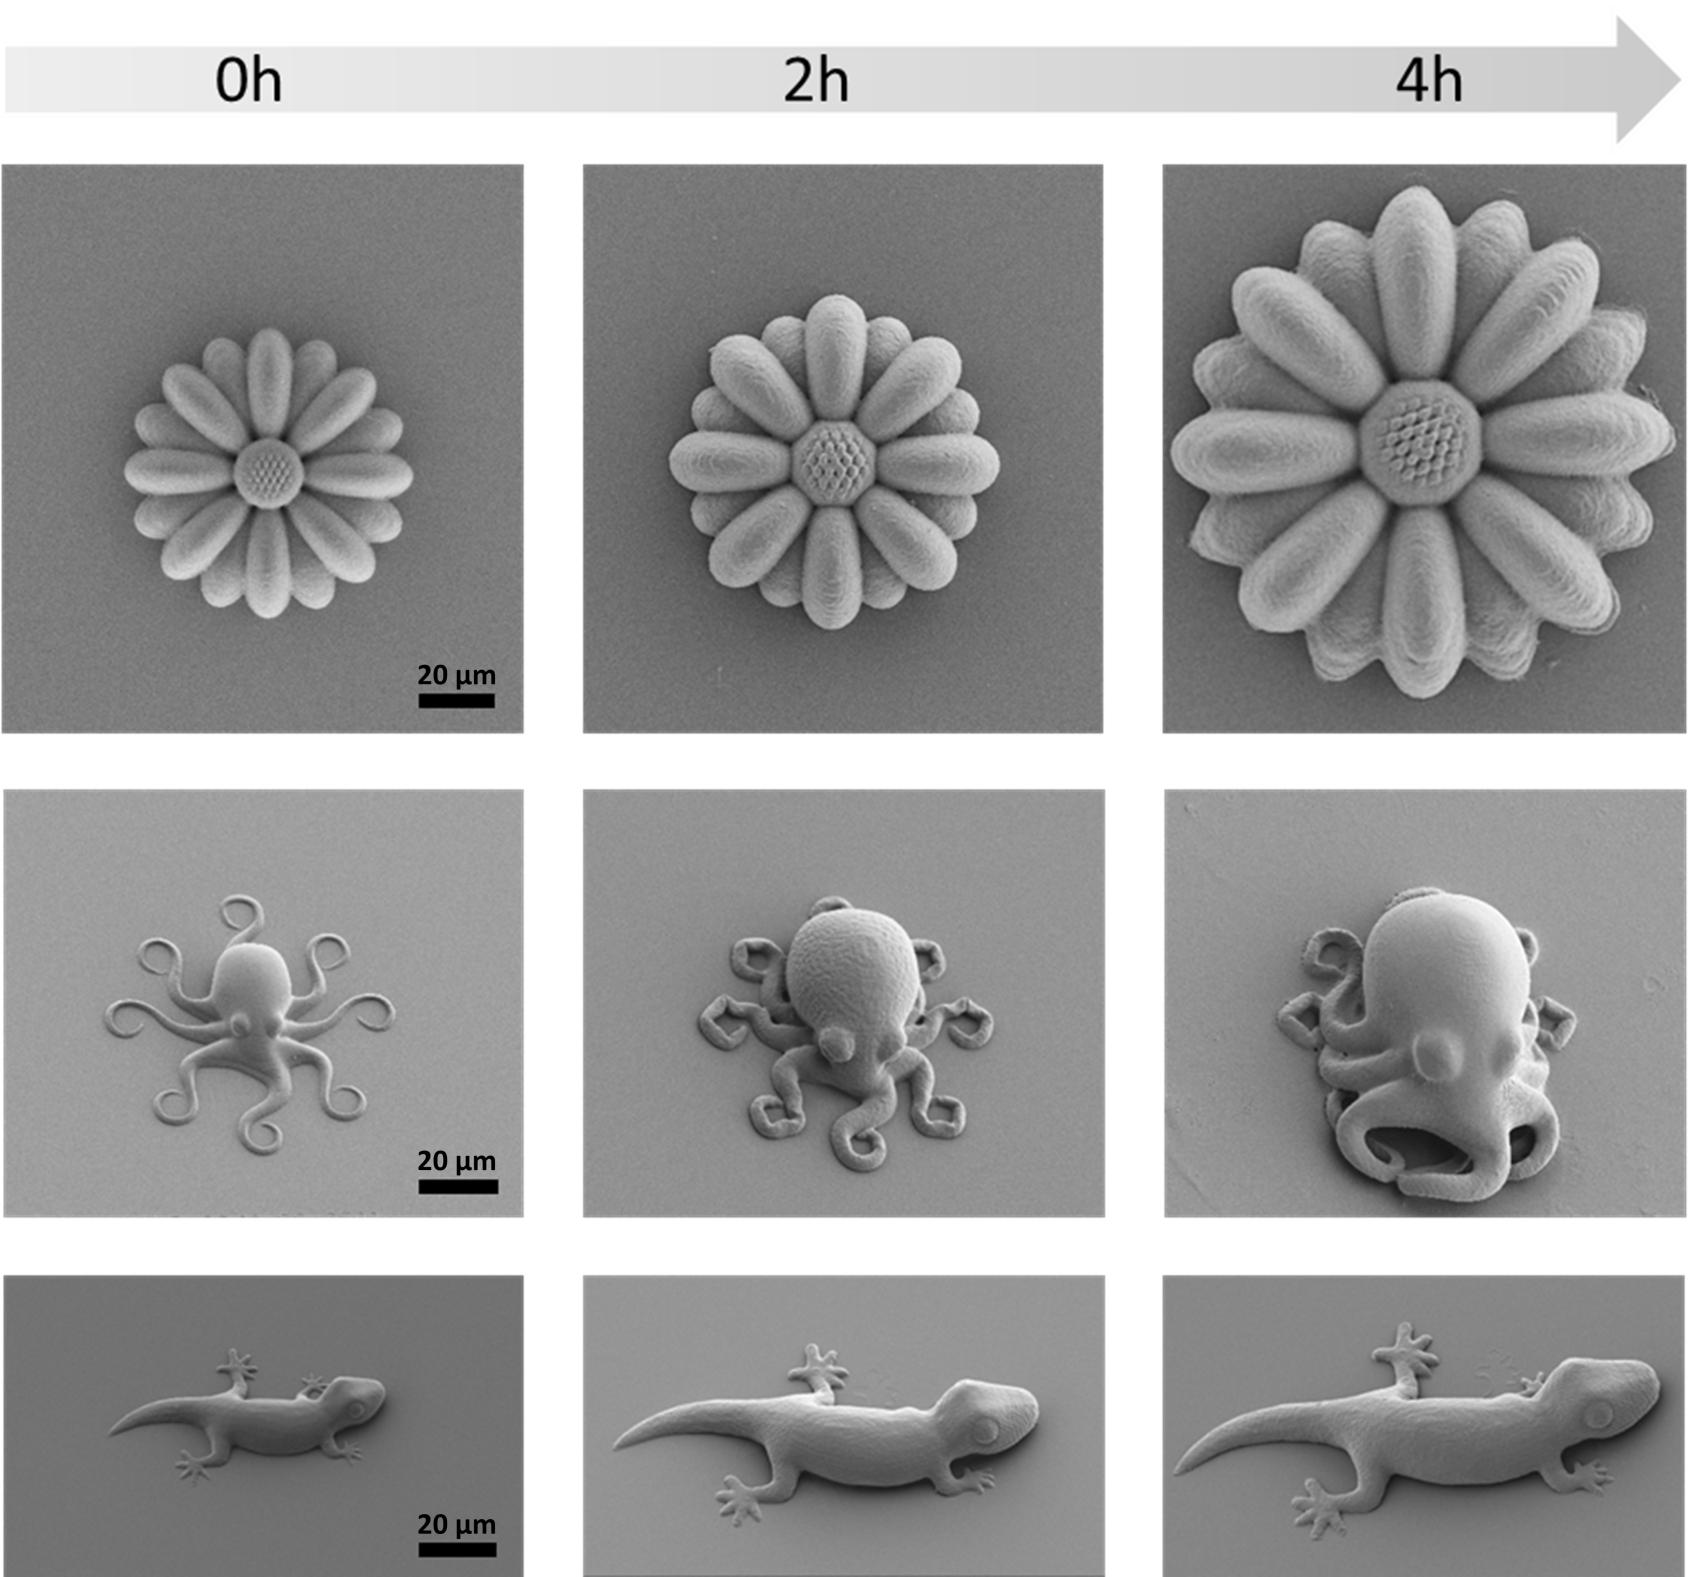 3D printed microstructures